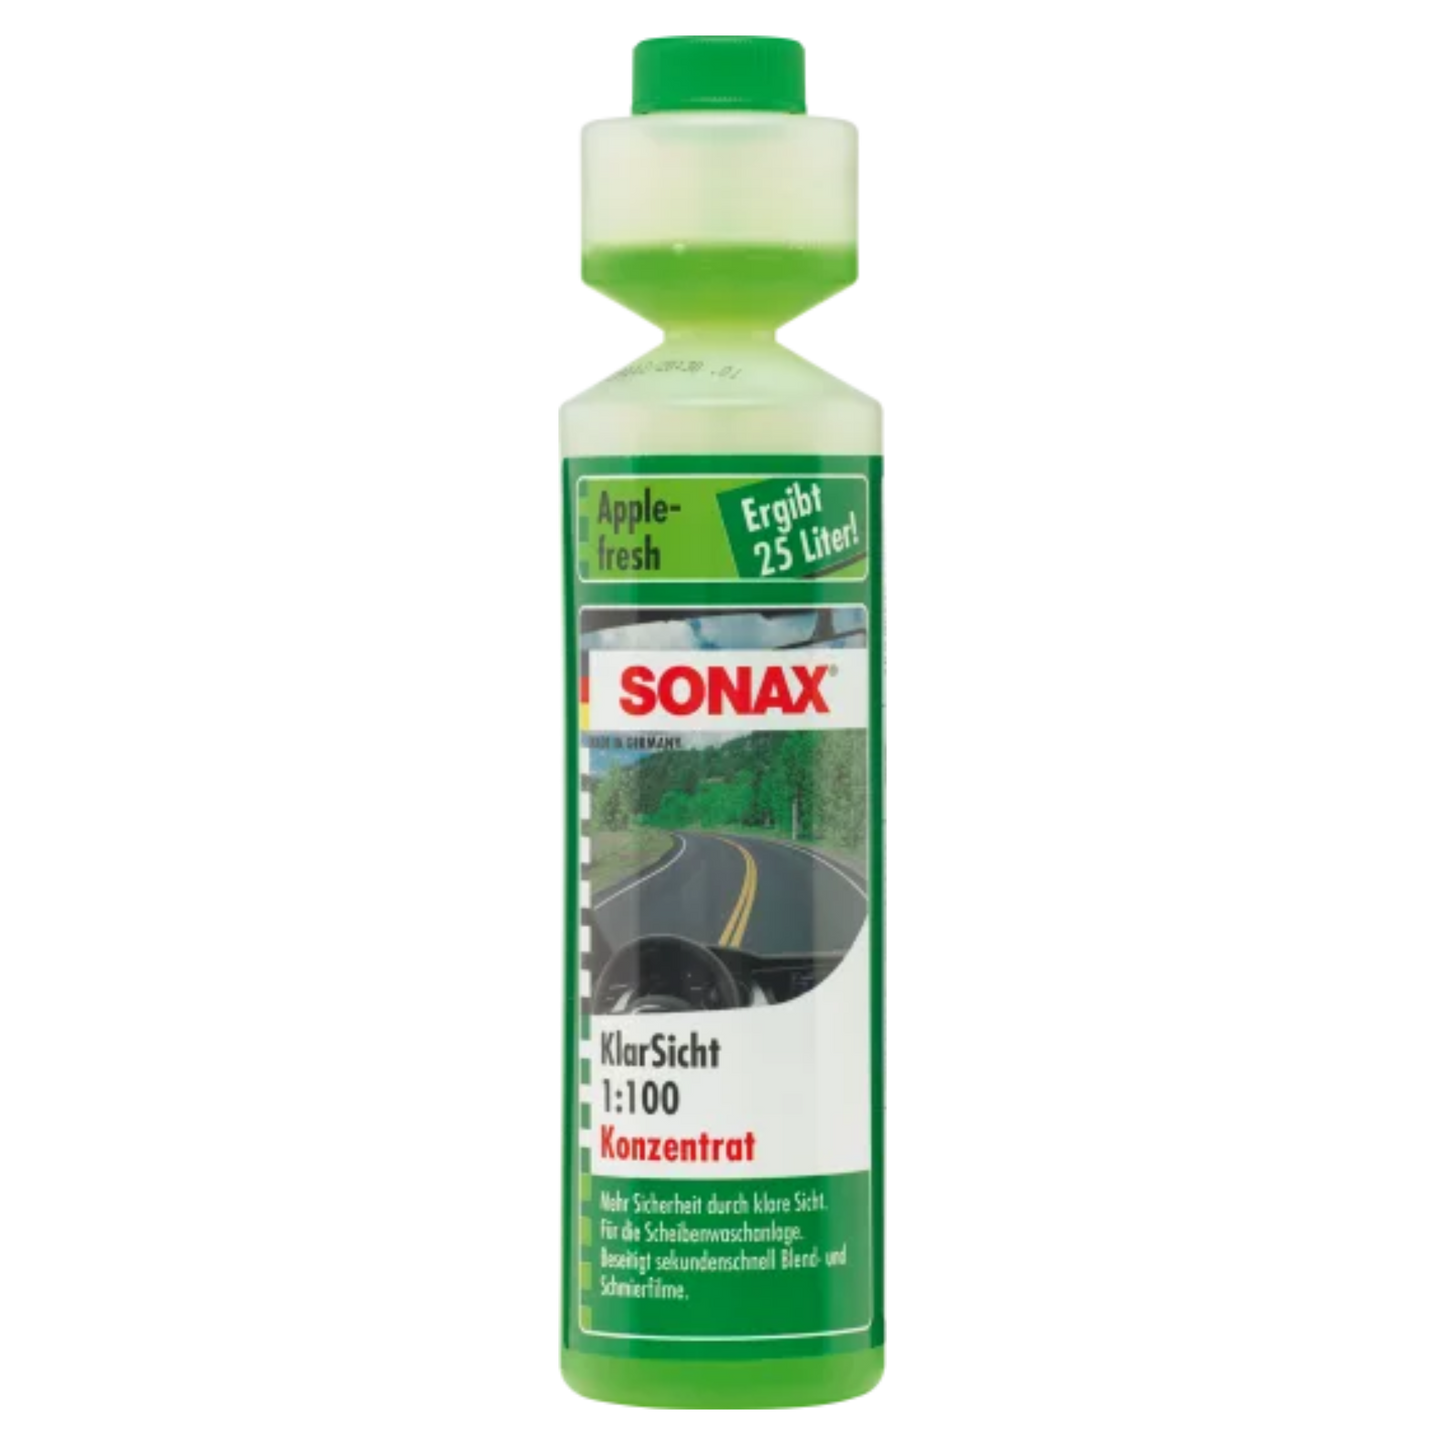 Koncentrat SONAX Clear Vision 1:100, 250ml